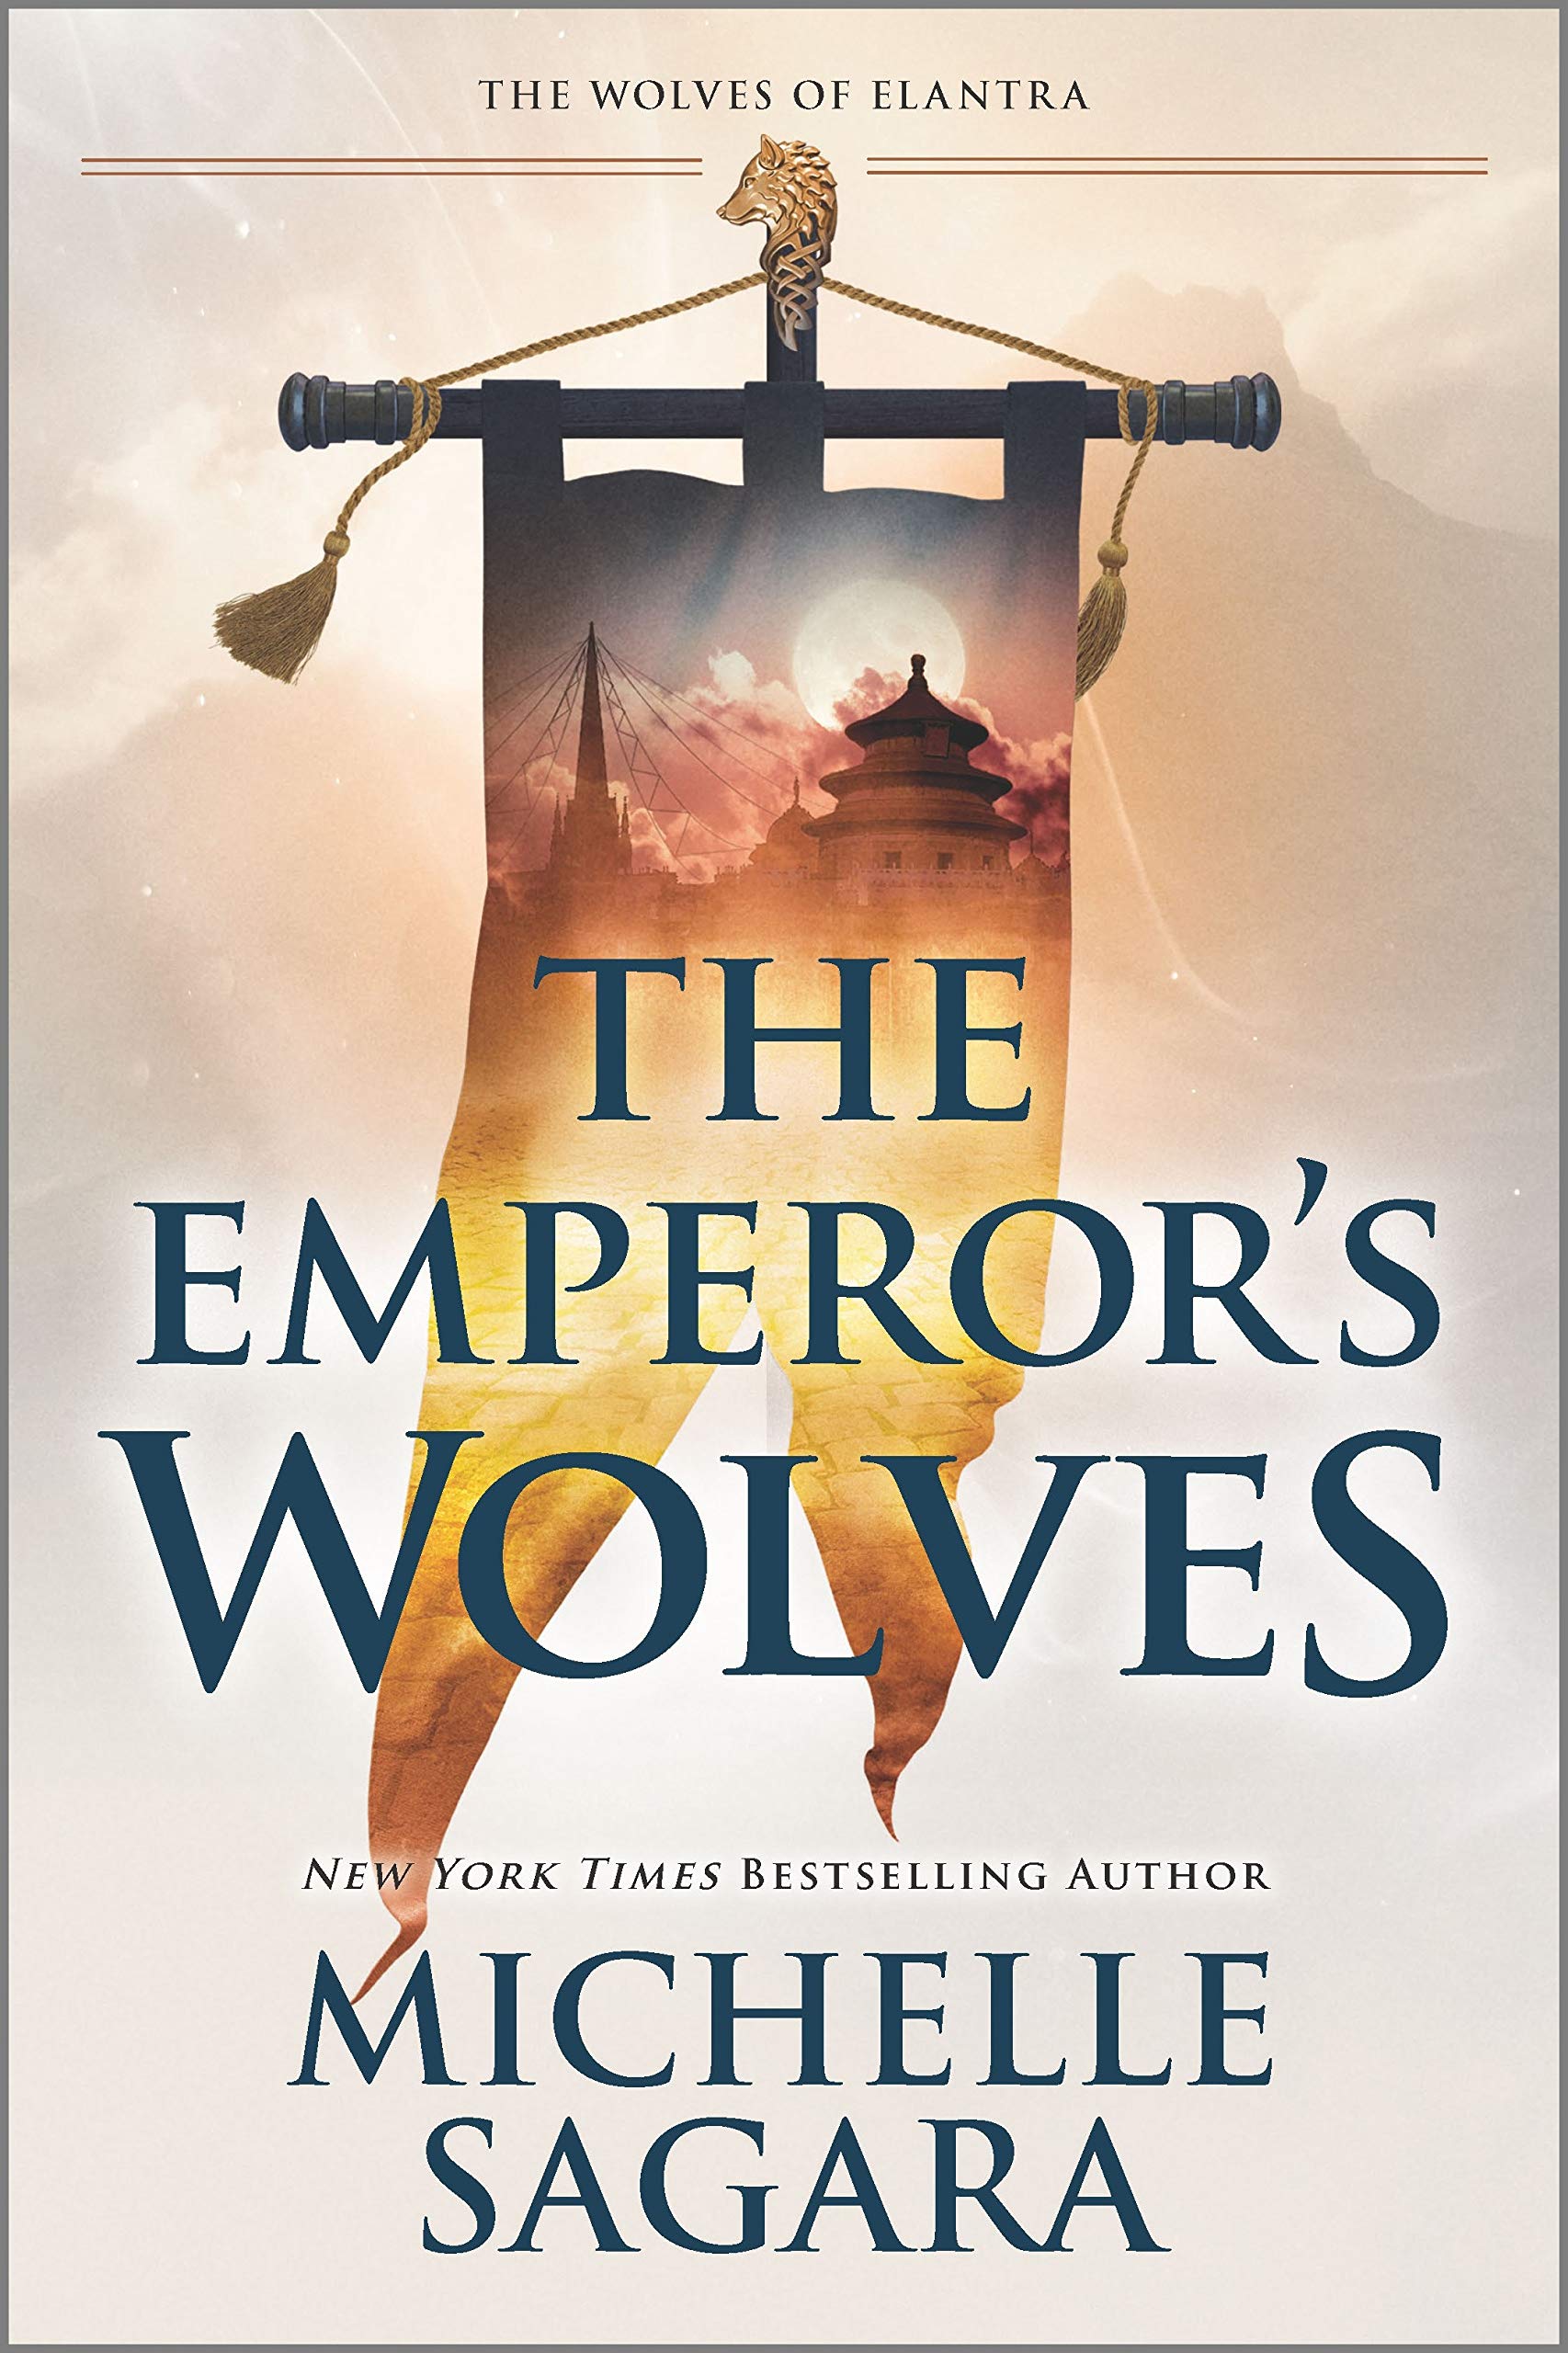 The Emperor's Wolves (The Wolves of Elantra Book 1)